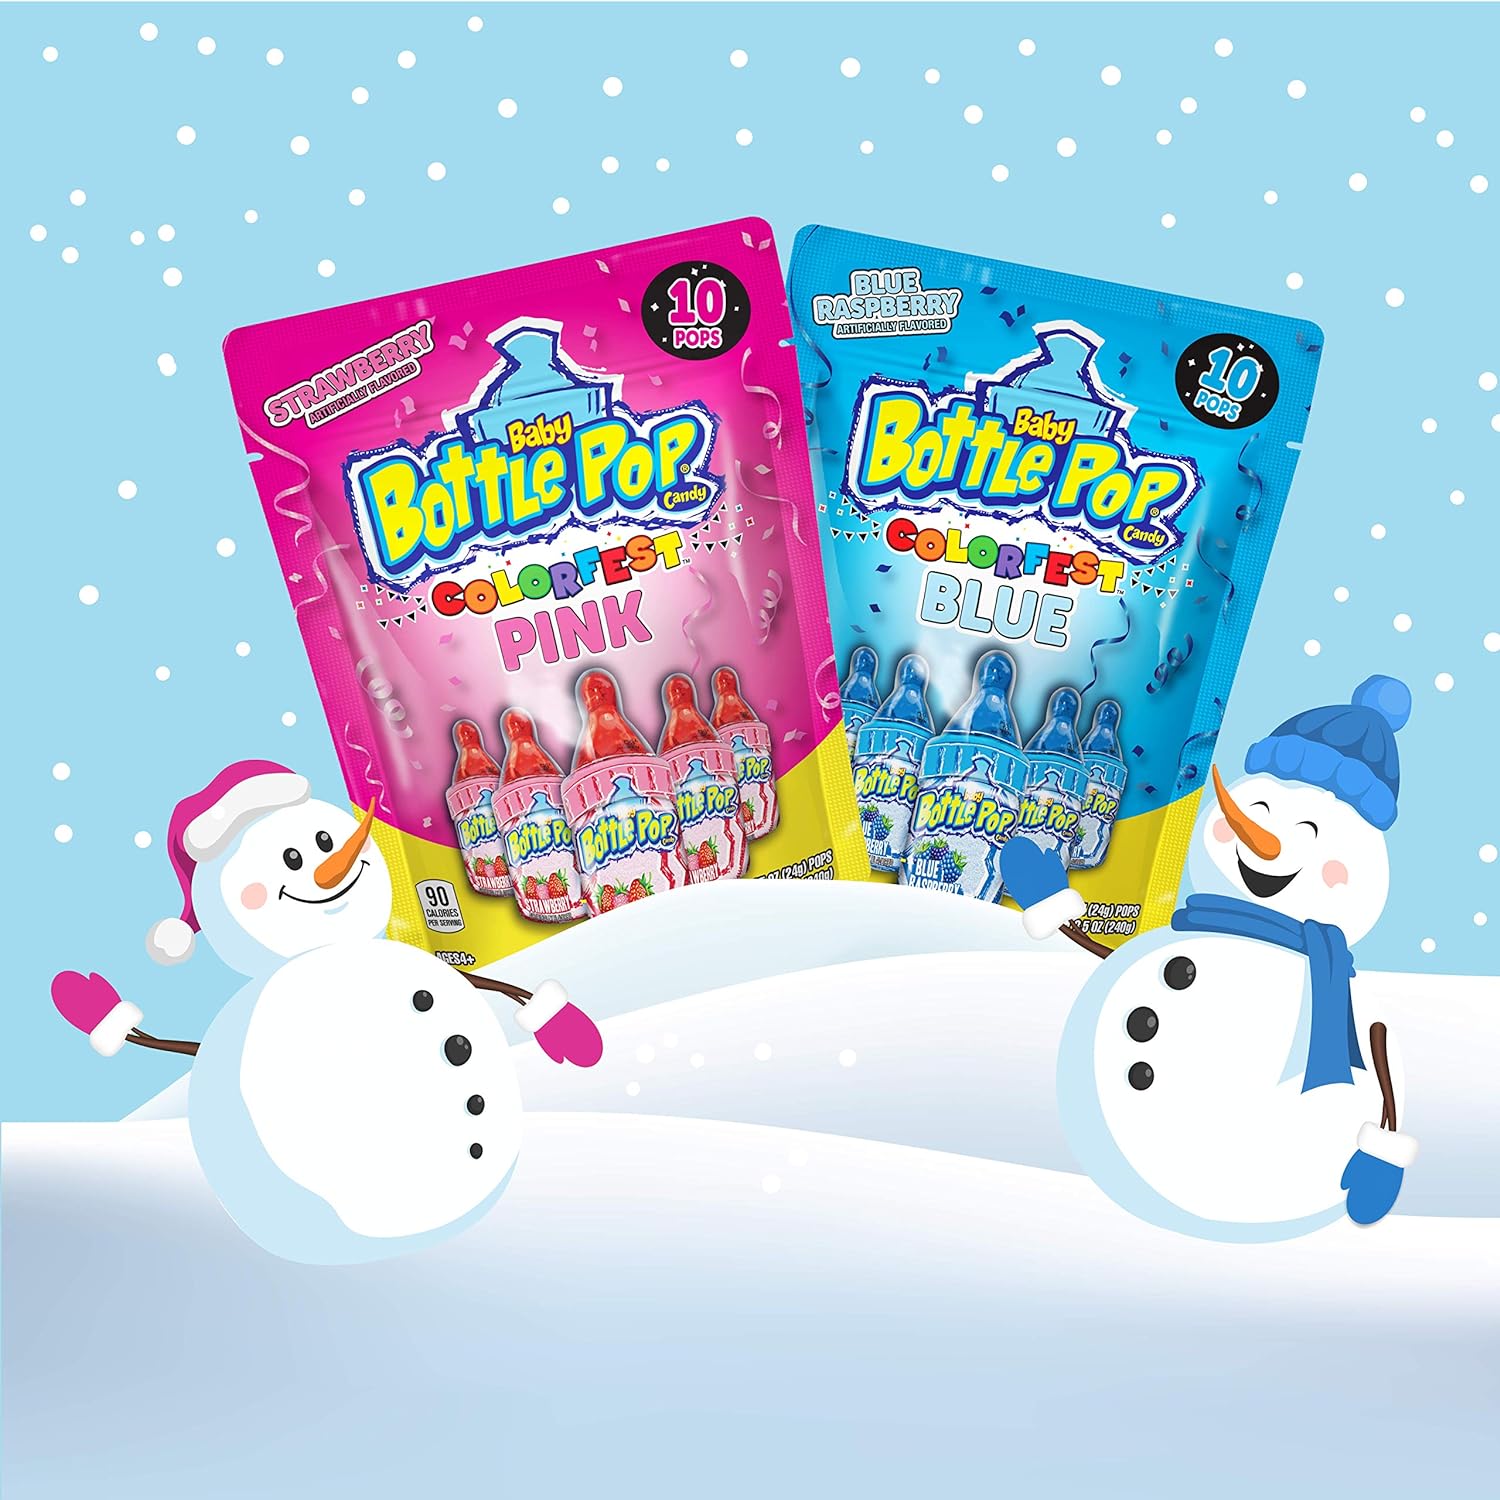  Baby Bottle Pop Individually Wrapped Party Pack With Flavored Candy/Lollipop Suckers & Candy for Celebrations And Virtual Parties, Blue Raspberry, 10 Count Bag